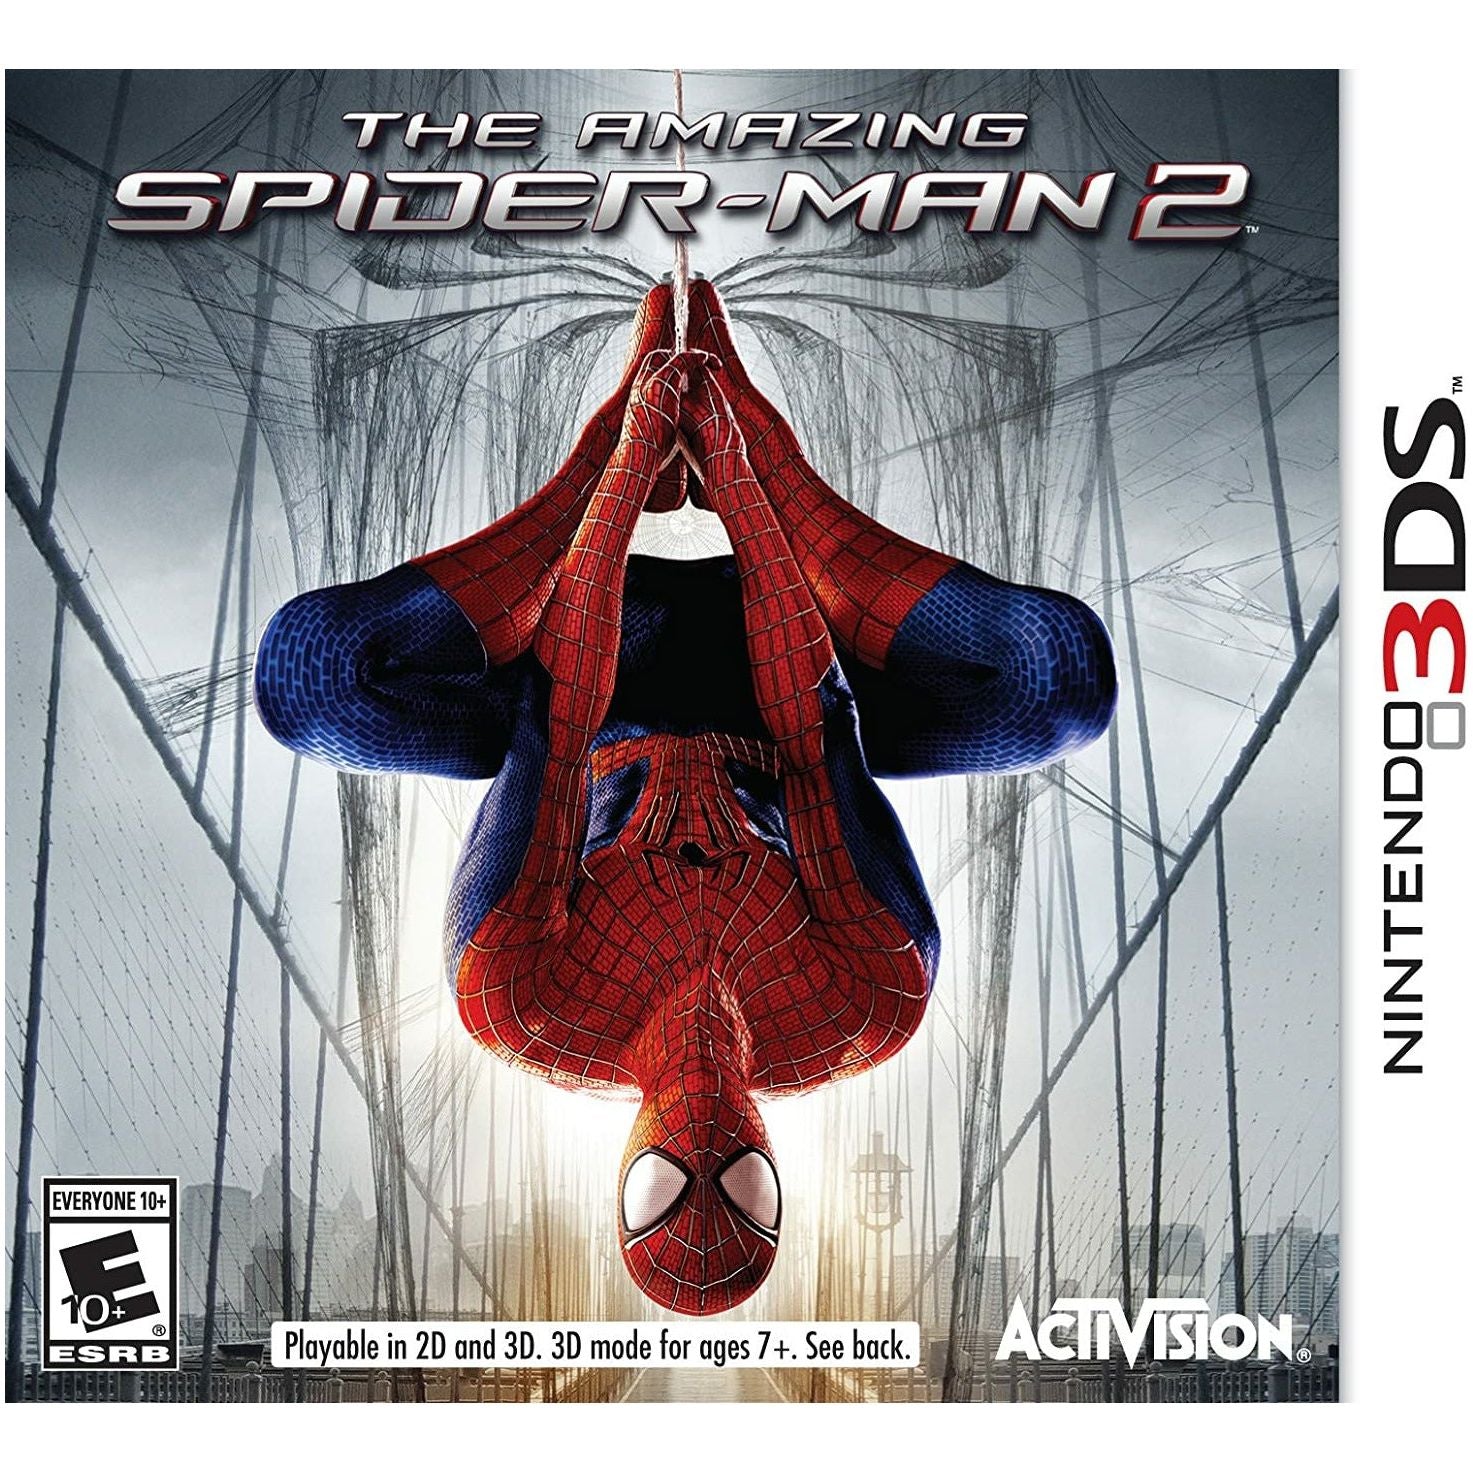 3DS - The Amazing Spider-Man 2 (Printed Cover Art)